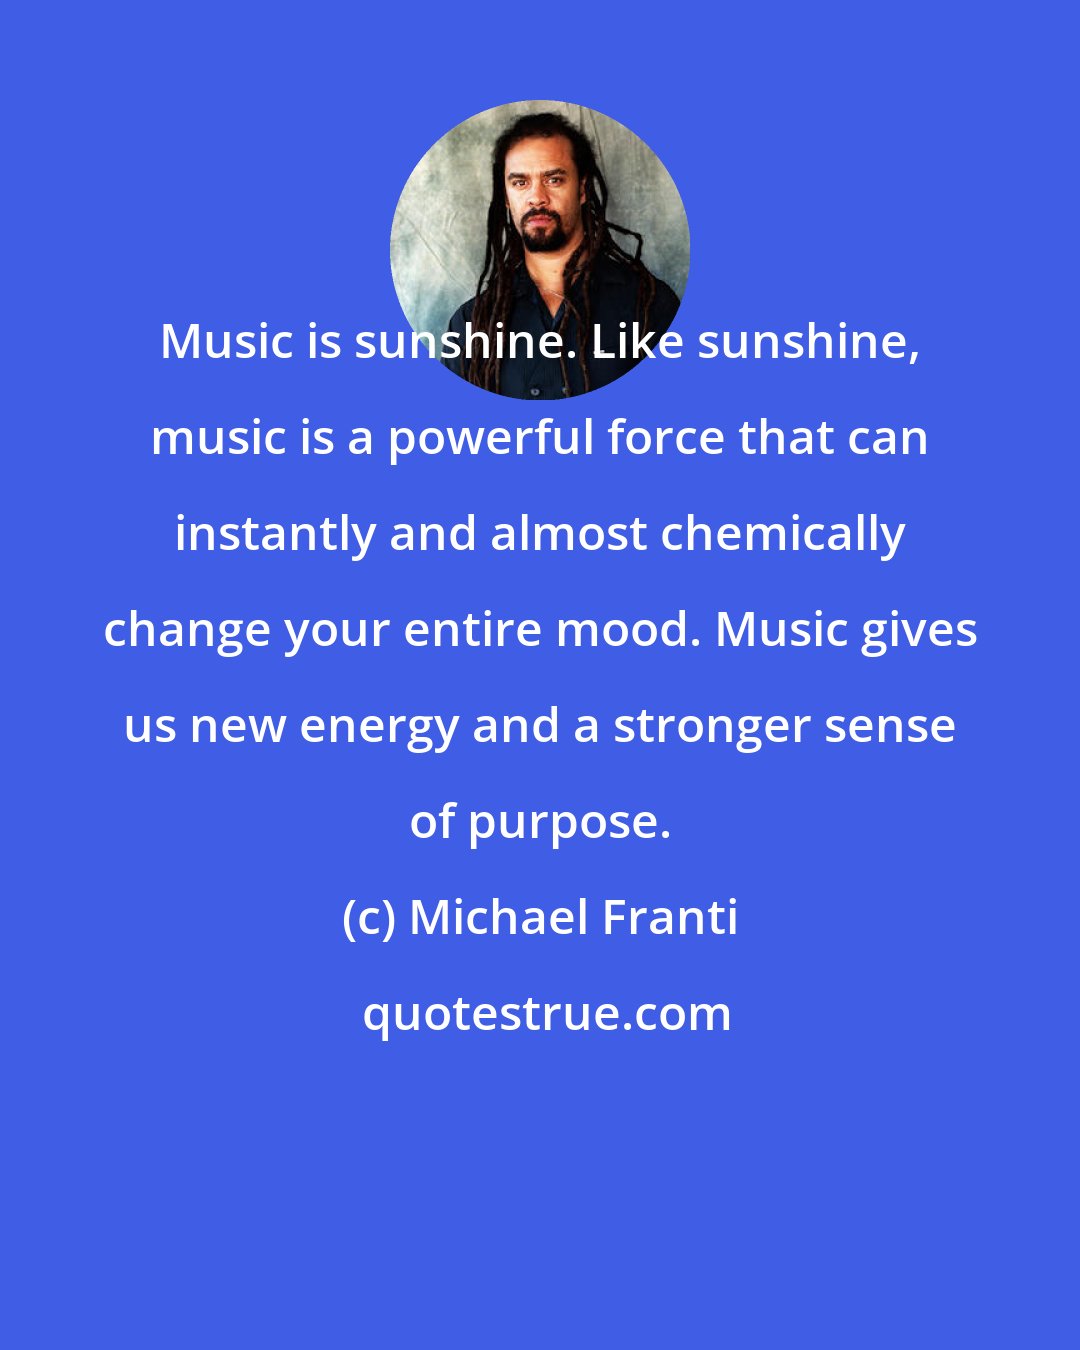 Michael Franti: Music is sunshine. Like sunshine, music is a powerful force that can instantly and almost chemically change your entire mood. Music gives us new energy and a stronger sense of purpose.